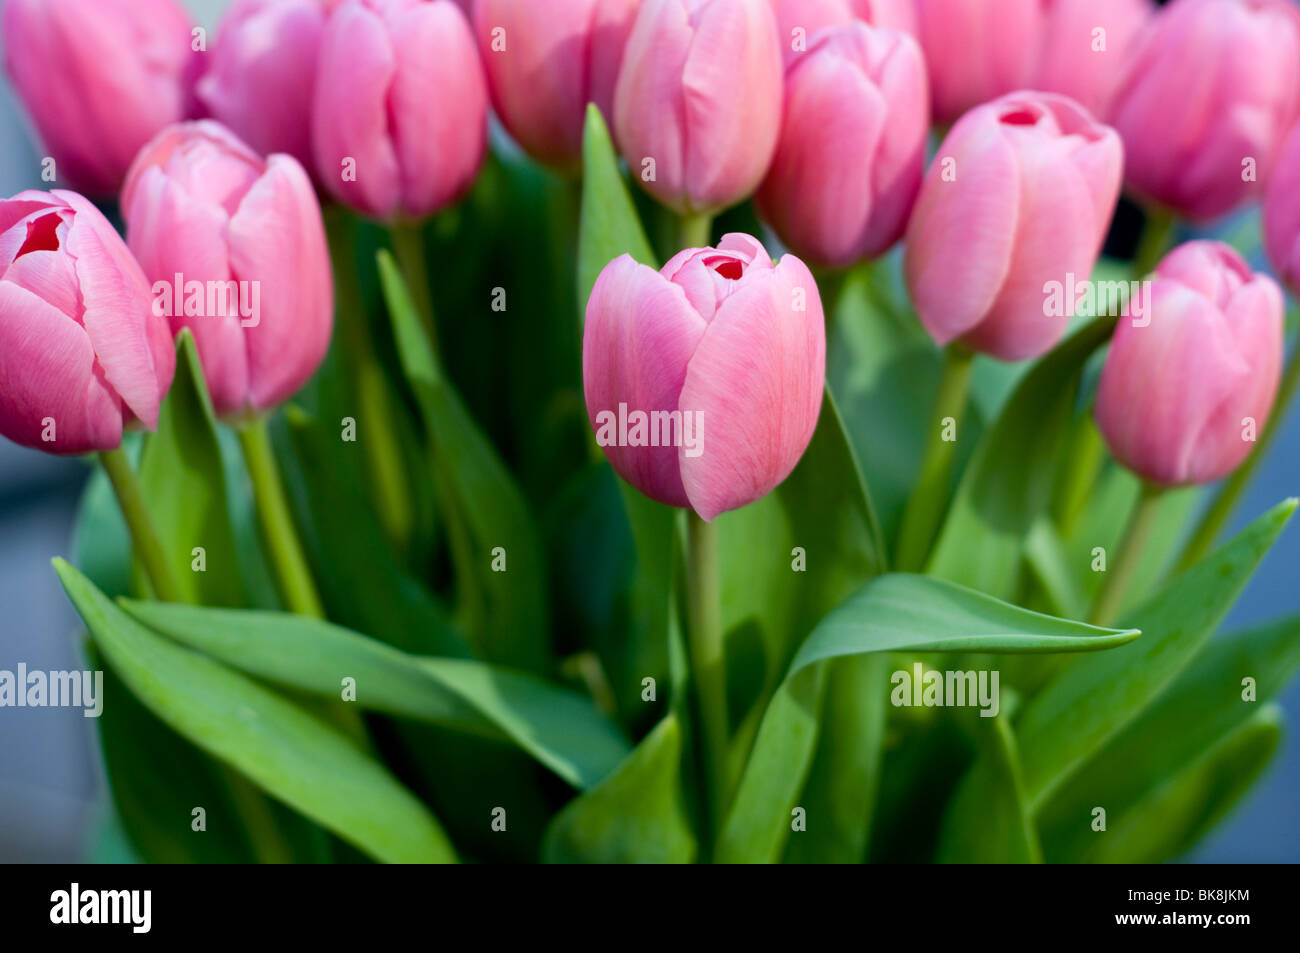 A bunch of pink tulips Stock Photo